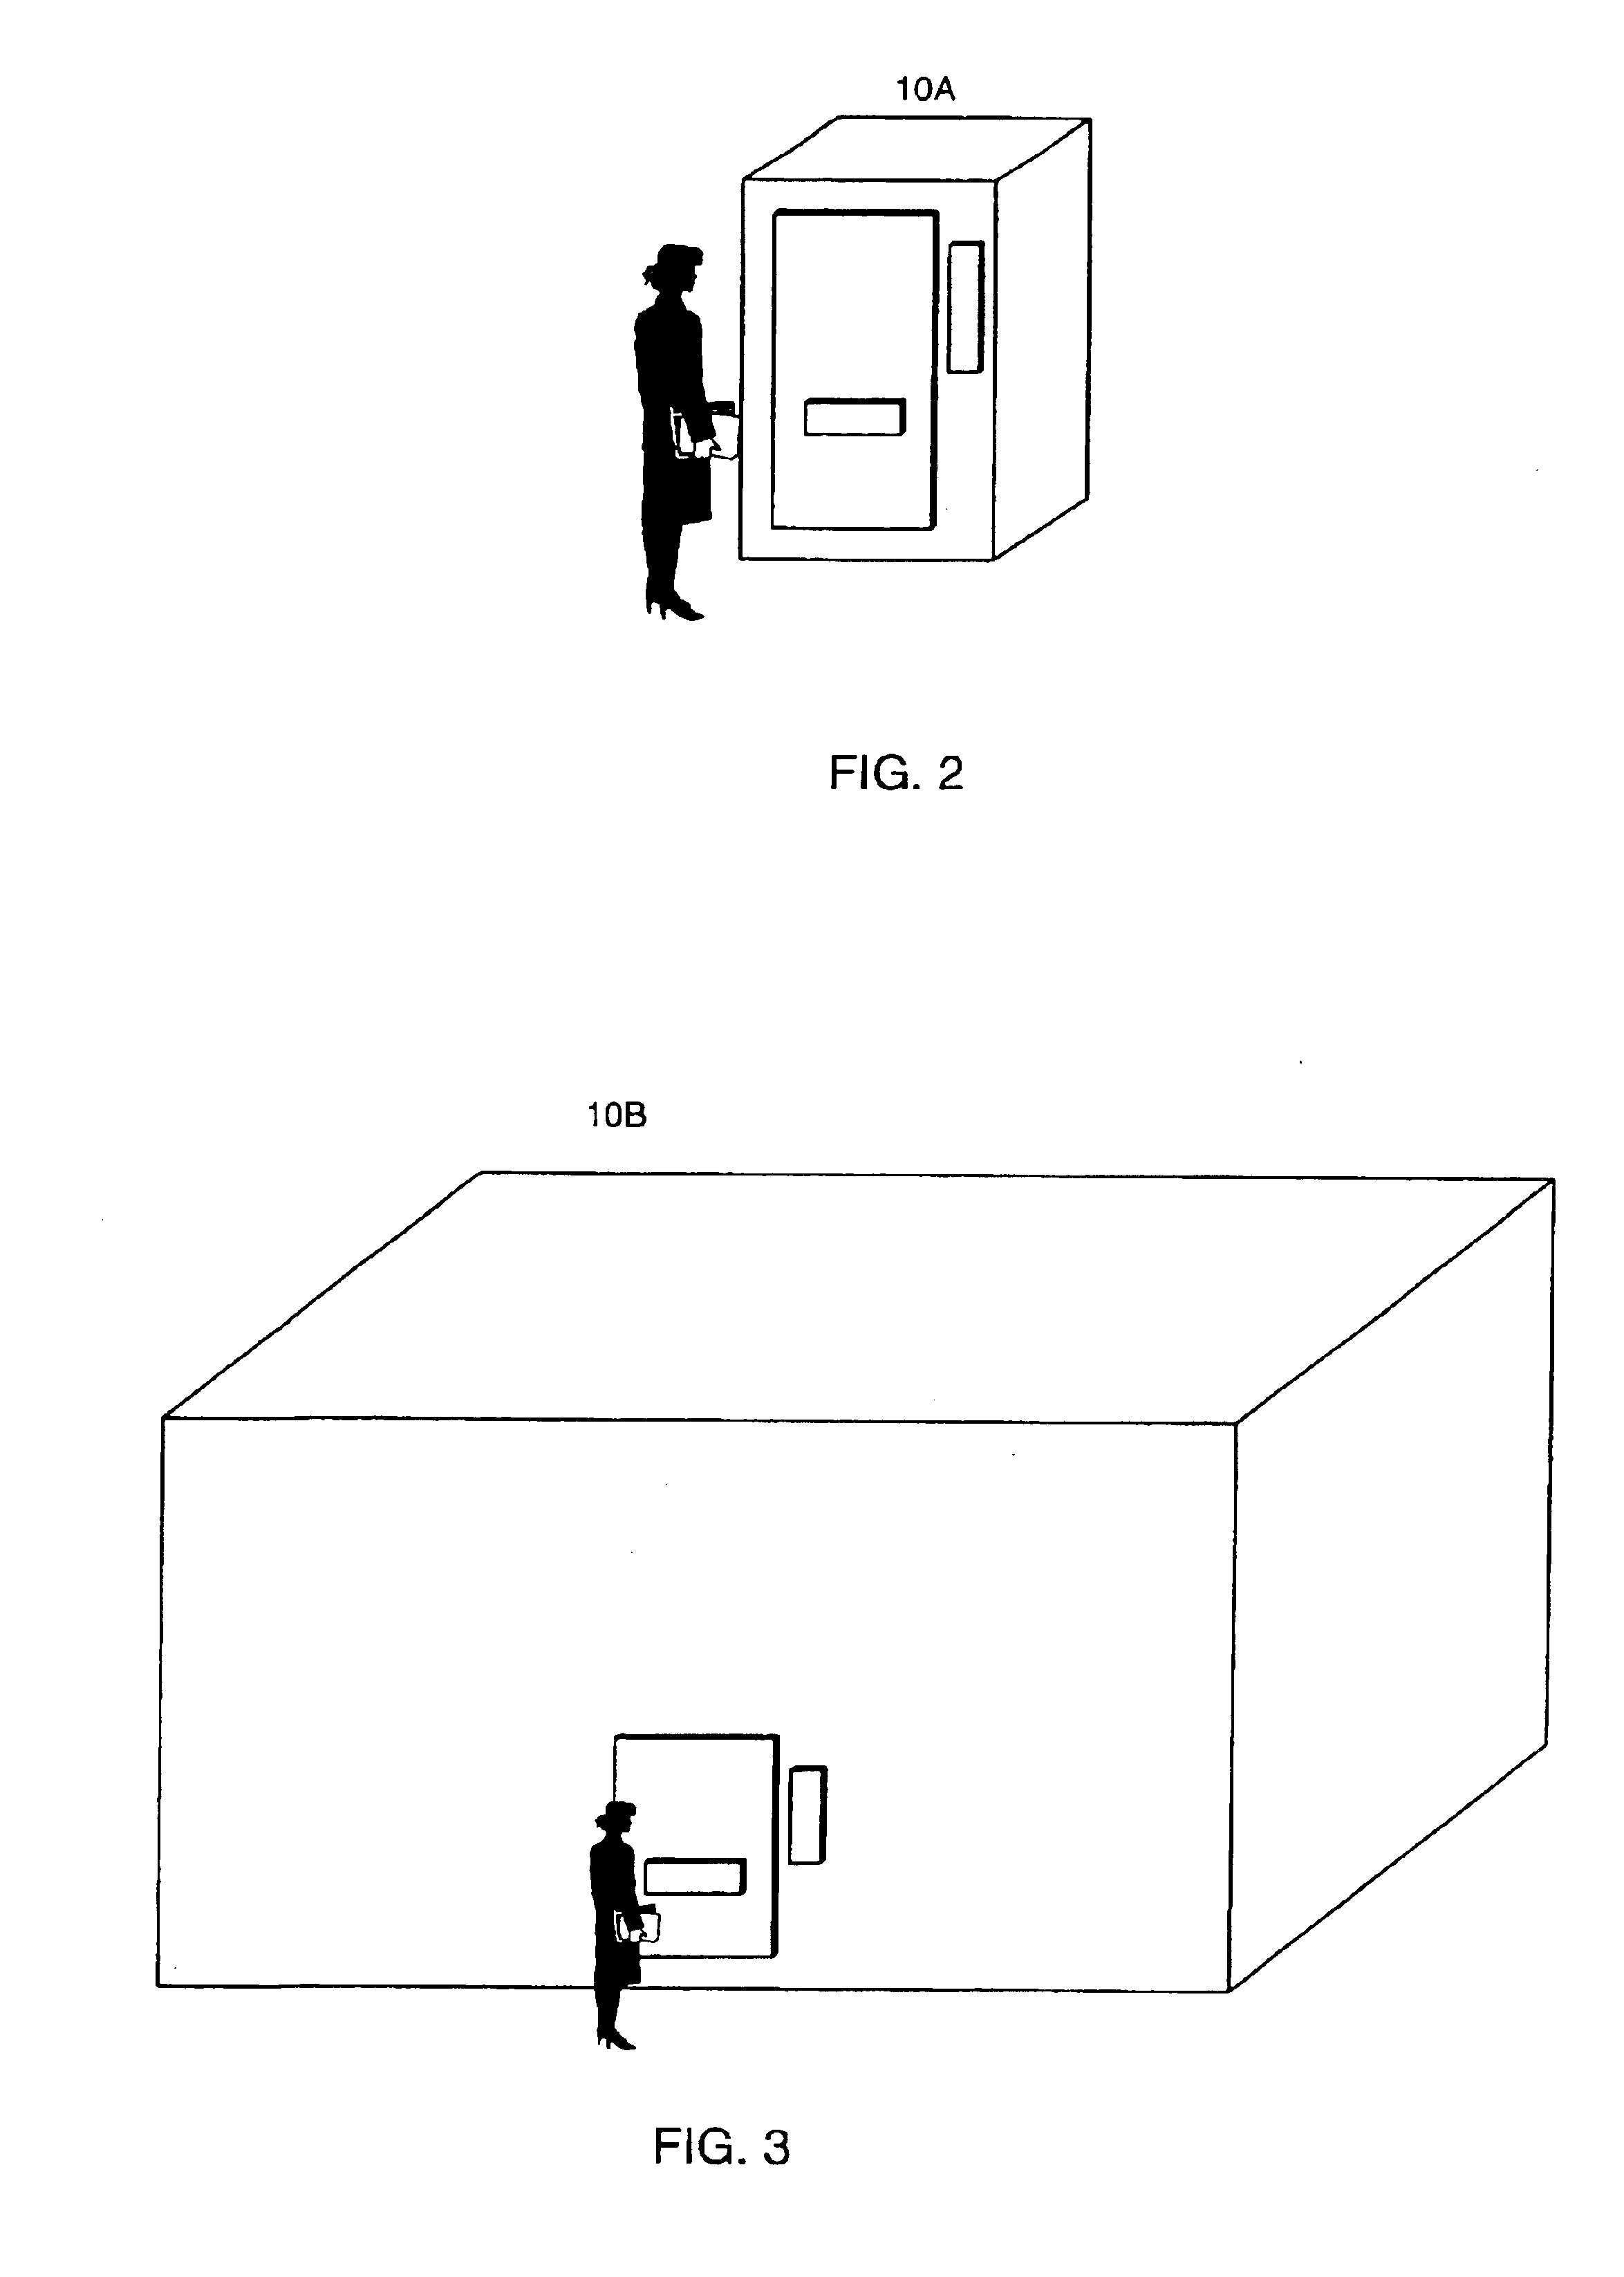 Method and apparatus for controlling rented or leased or loaned equipment